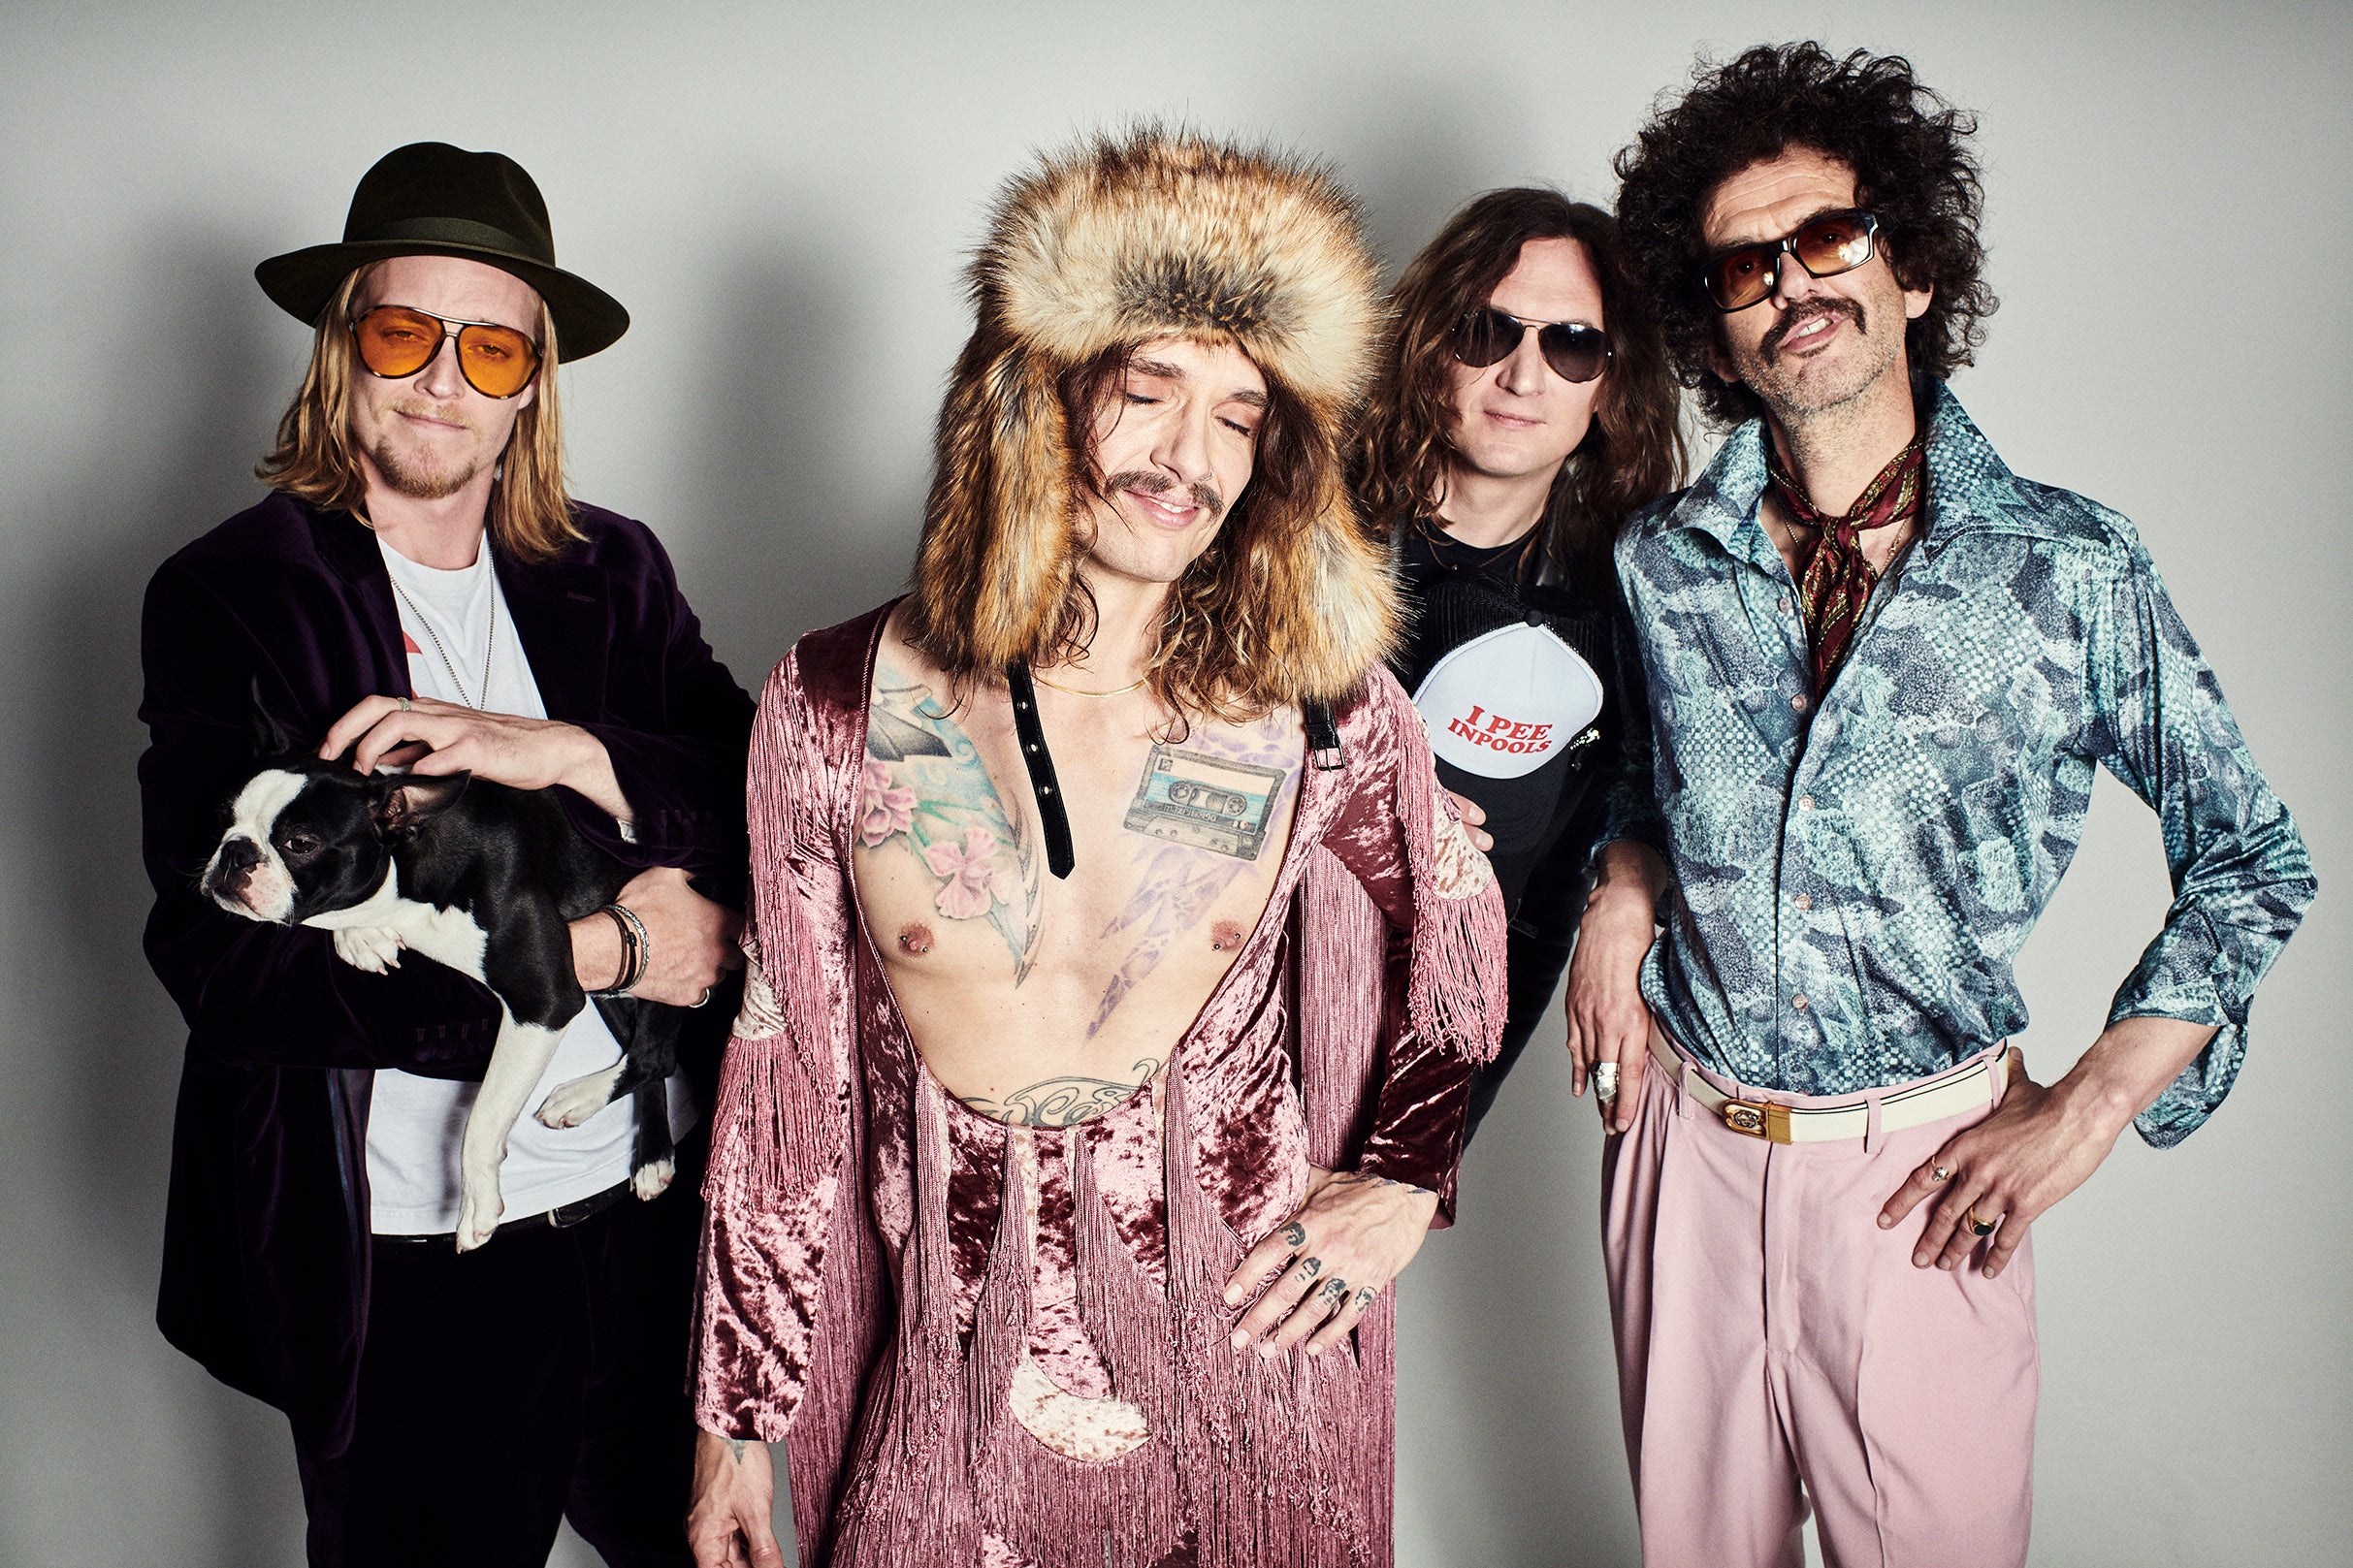 Image used with permission from Ticketmaster | The Darkness - Motorheart Tour tickets